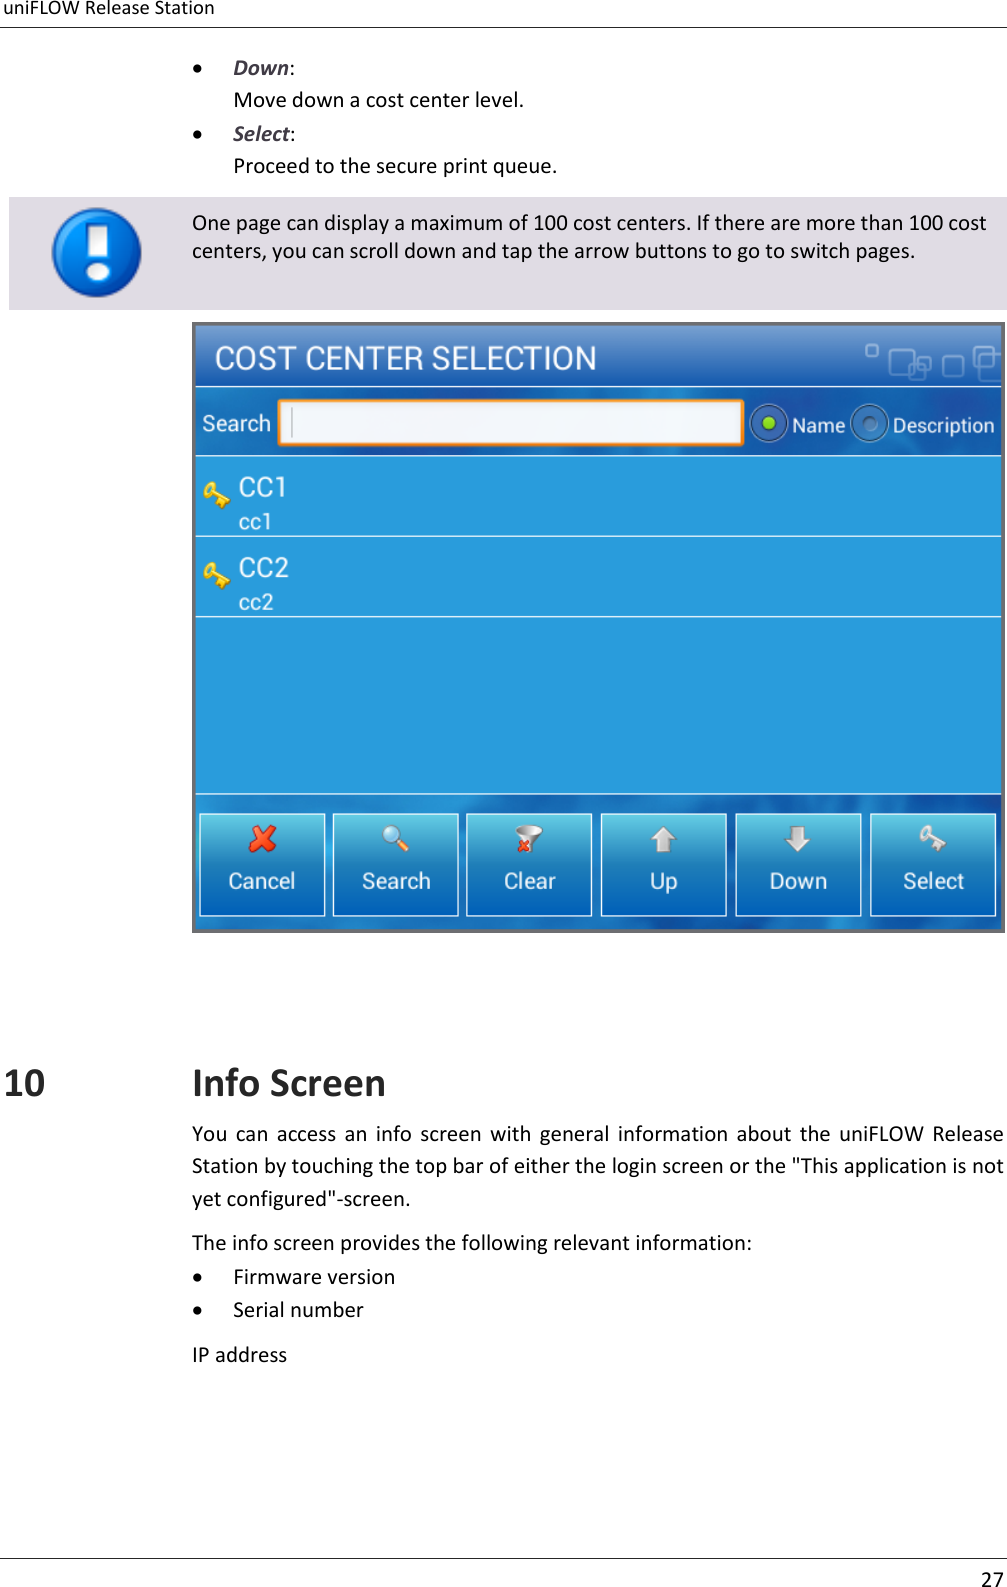 uniFLOW Release Station     27   Down: Move down a cost center level.  Select: Proceed to the secure print queue.   One page can display a maximum of 100 cost centers. If there are more than 100 cost centers, you can scroll down and tap the arrow buttons to go to switch pages.   10 Info Screen You  can  access  an  info  screen  with  general  information  about  the  uniFLOW  Release Station by touching the top bar of either the login screen or the &quot;This application is not yet configured&quot;-screen. The info screen provides the following relevant information:  Firmware version  Serial number IP address  